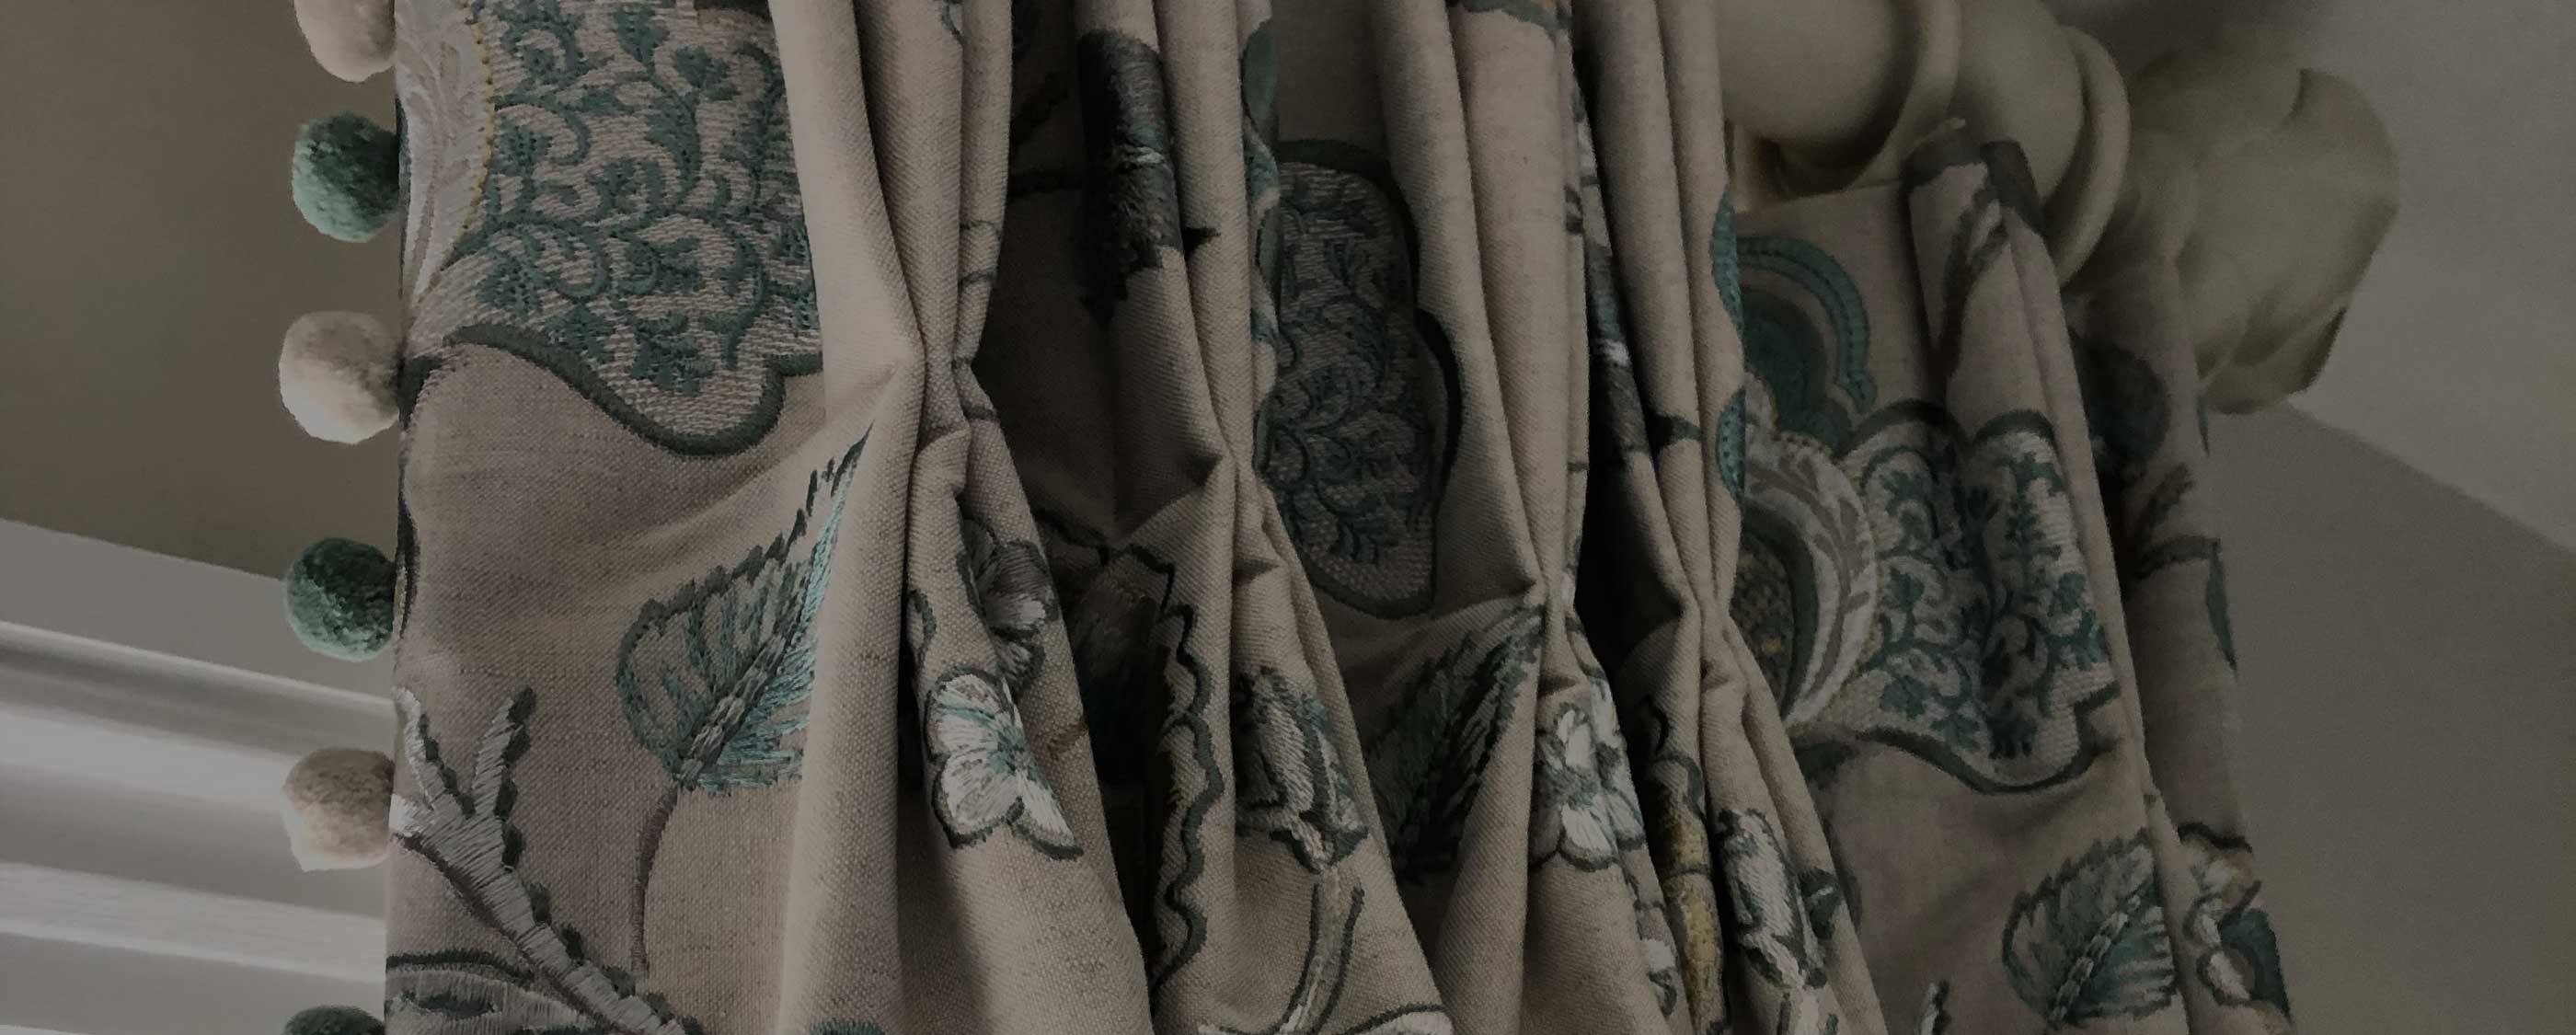 Specialist independent curtain maker providing beautiful handmade curtains, blinds, upholstery and soft furnishings